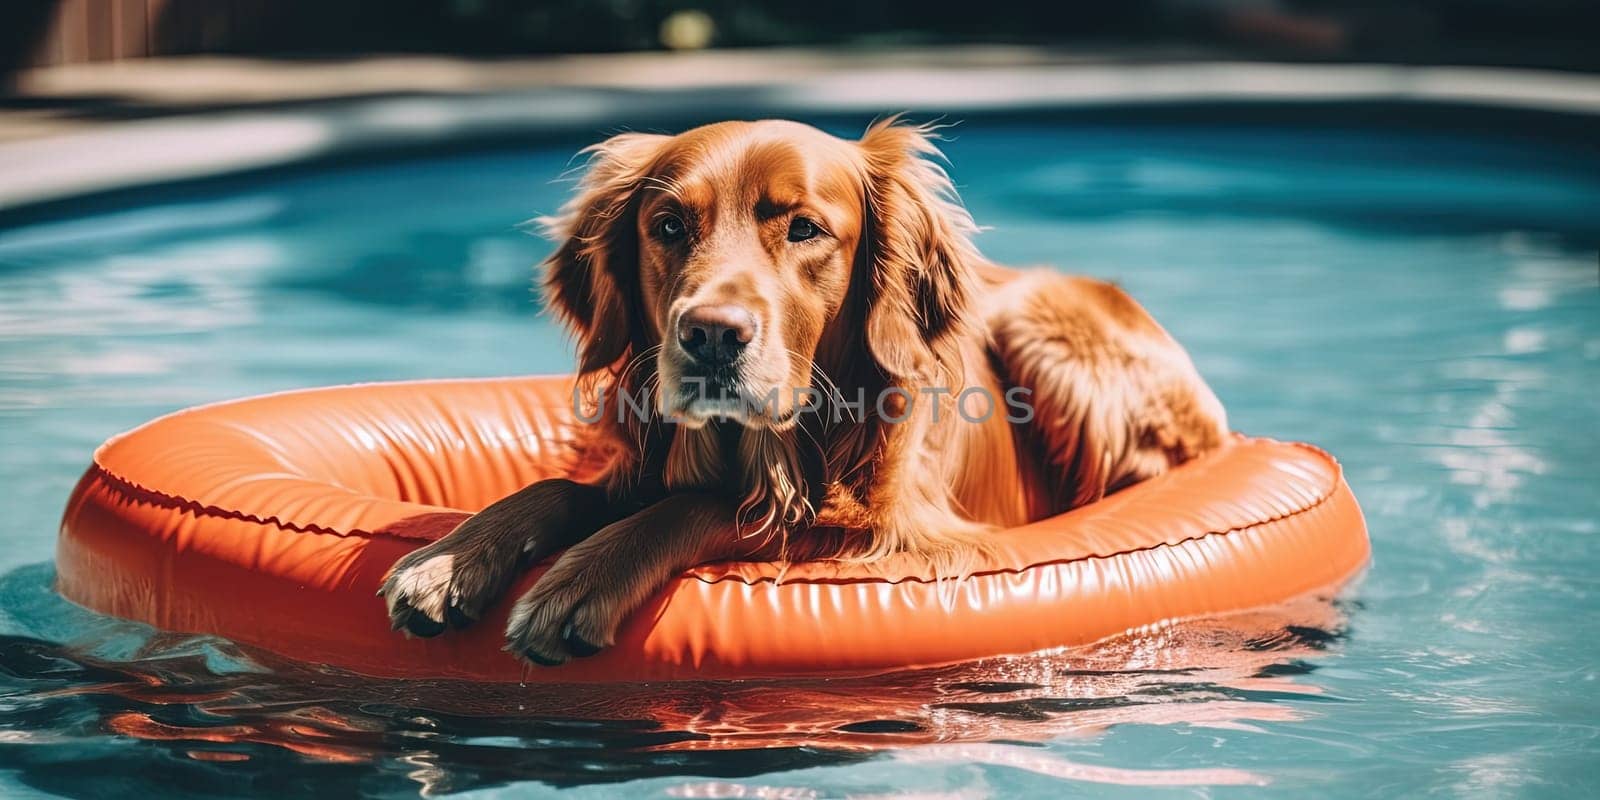 Dog enjoys swimming in pool with inflatable circle mattress on water. by GekaSkr